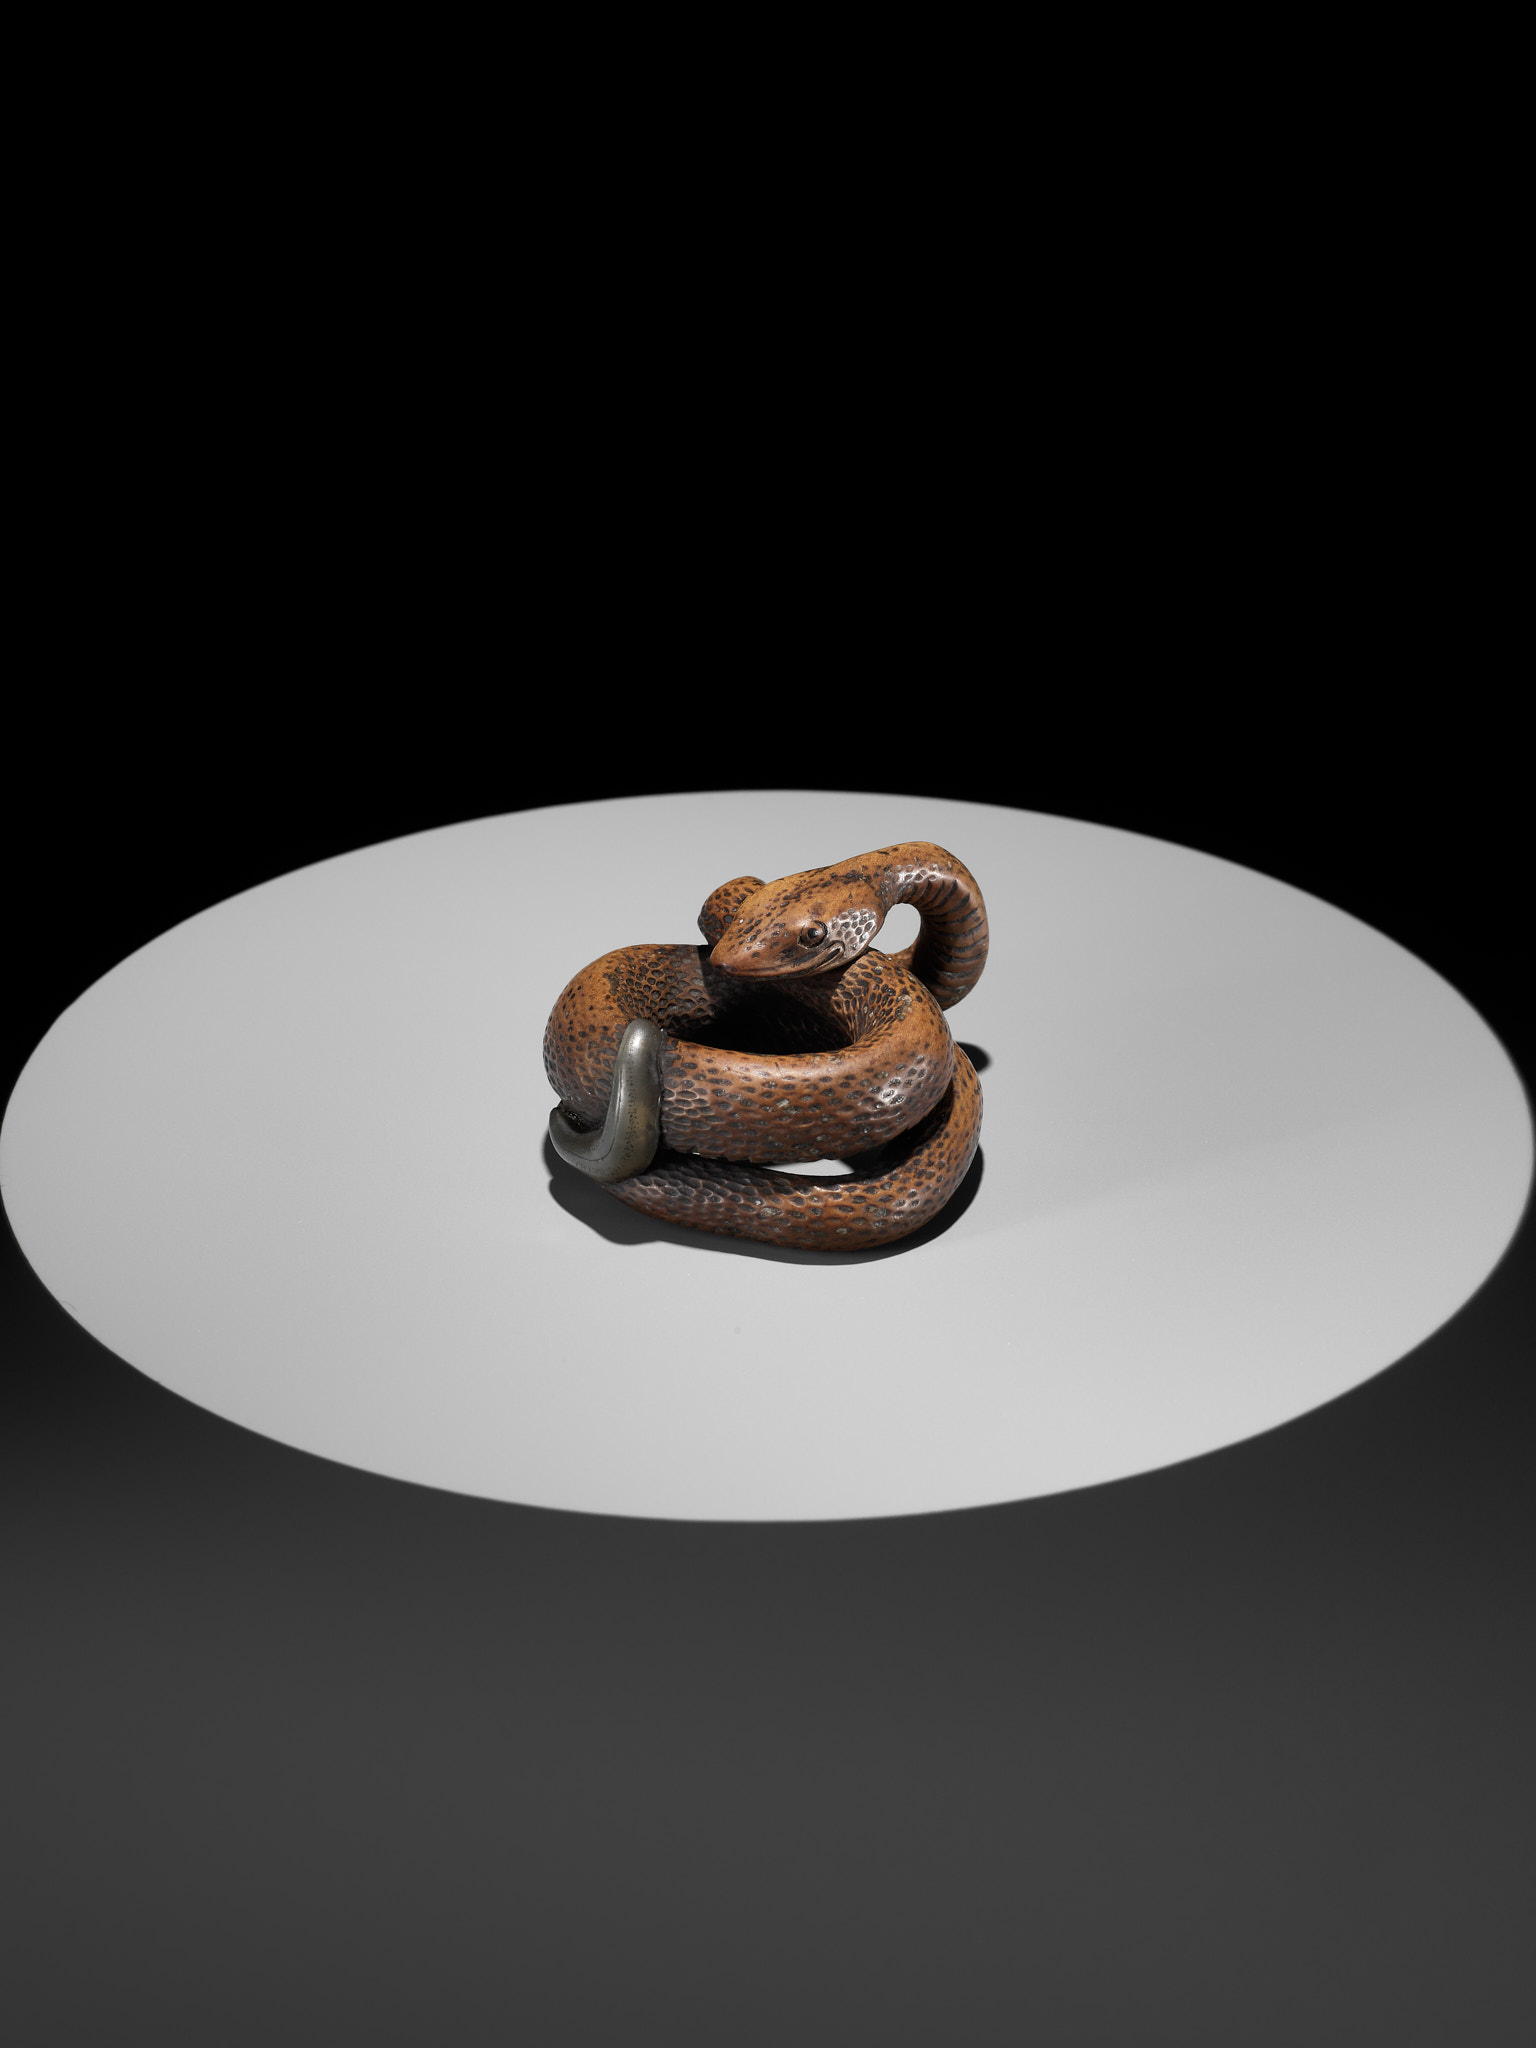 A LARGE AND POWERFUL WOOD NETSUKE OF A COILED SNAKE WITH AN INLAID SLUG BY TOMOKAZU - Image 3 of 13